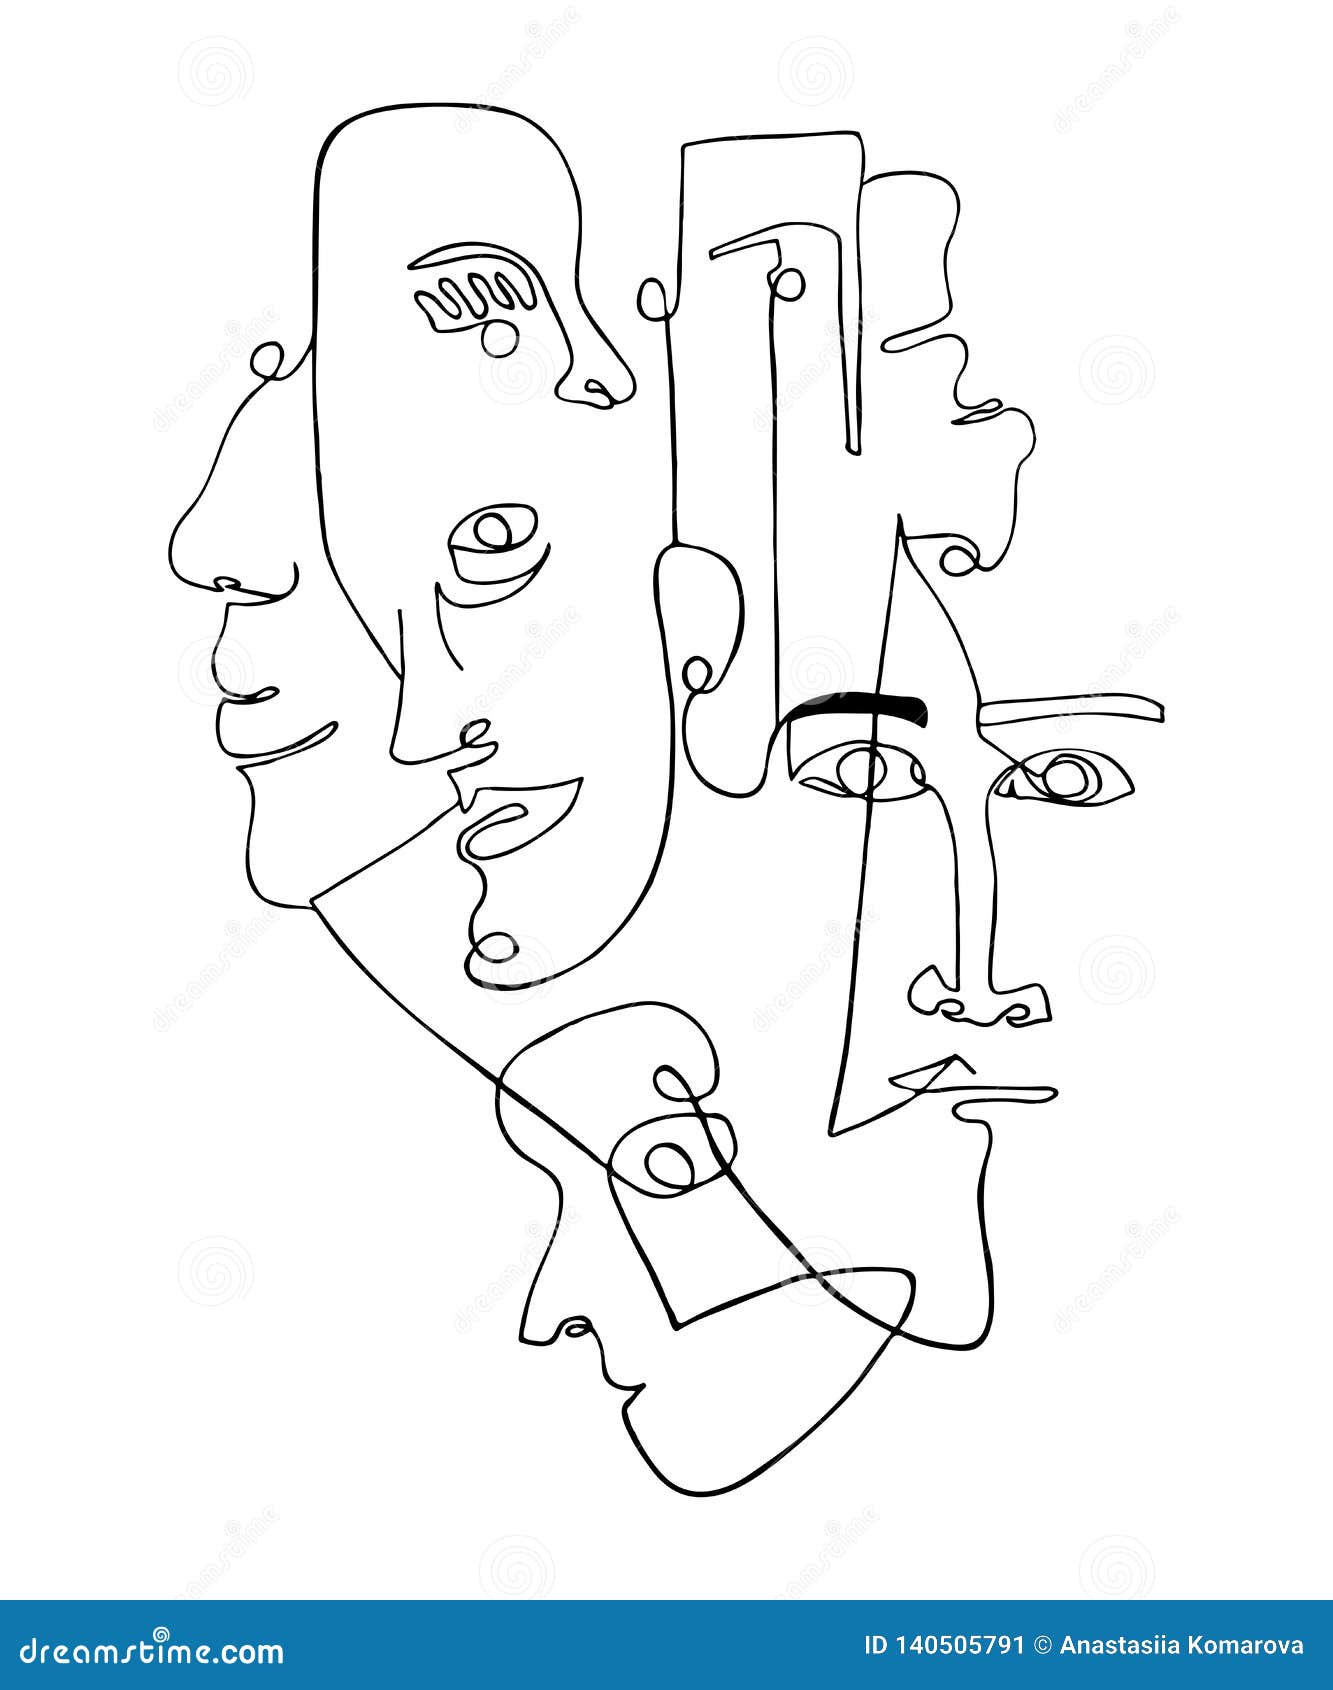 Face One Line Art,One Line Drawing,Abstract Face Print,Woman Drawing